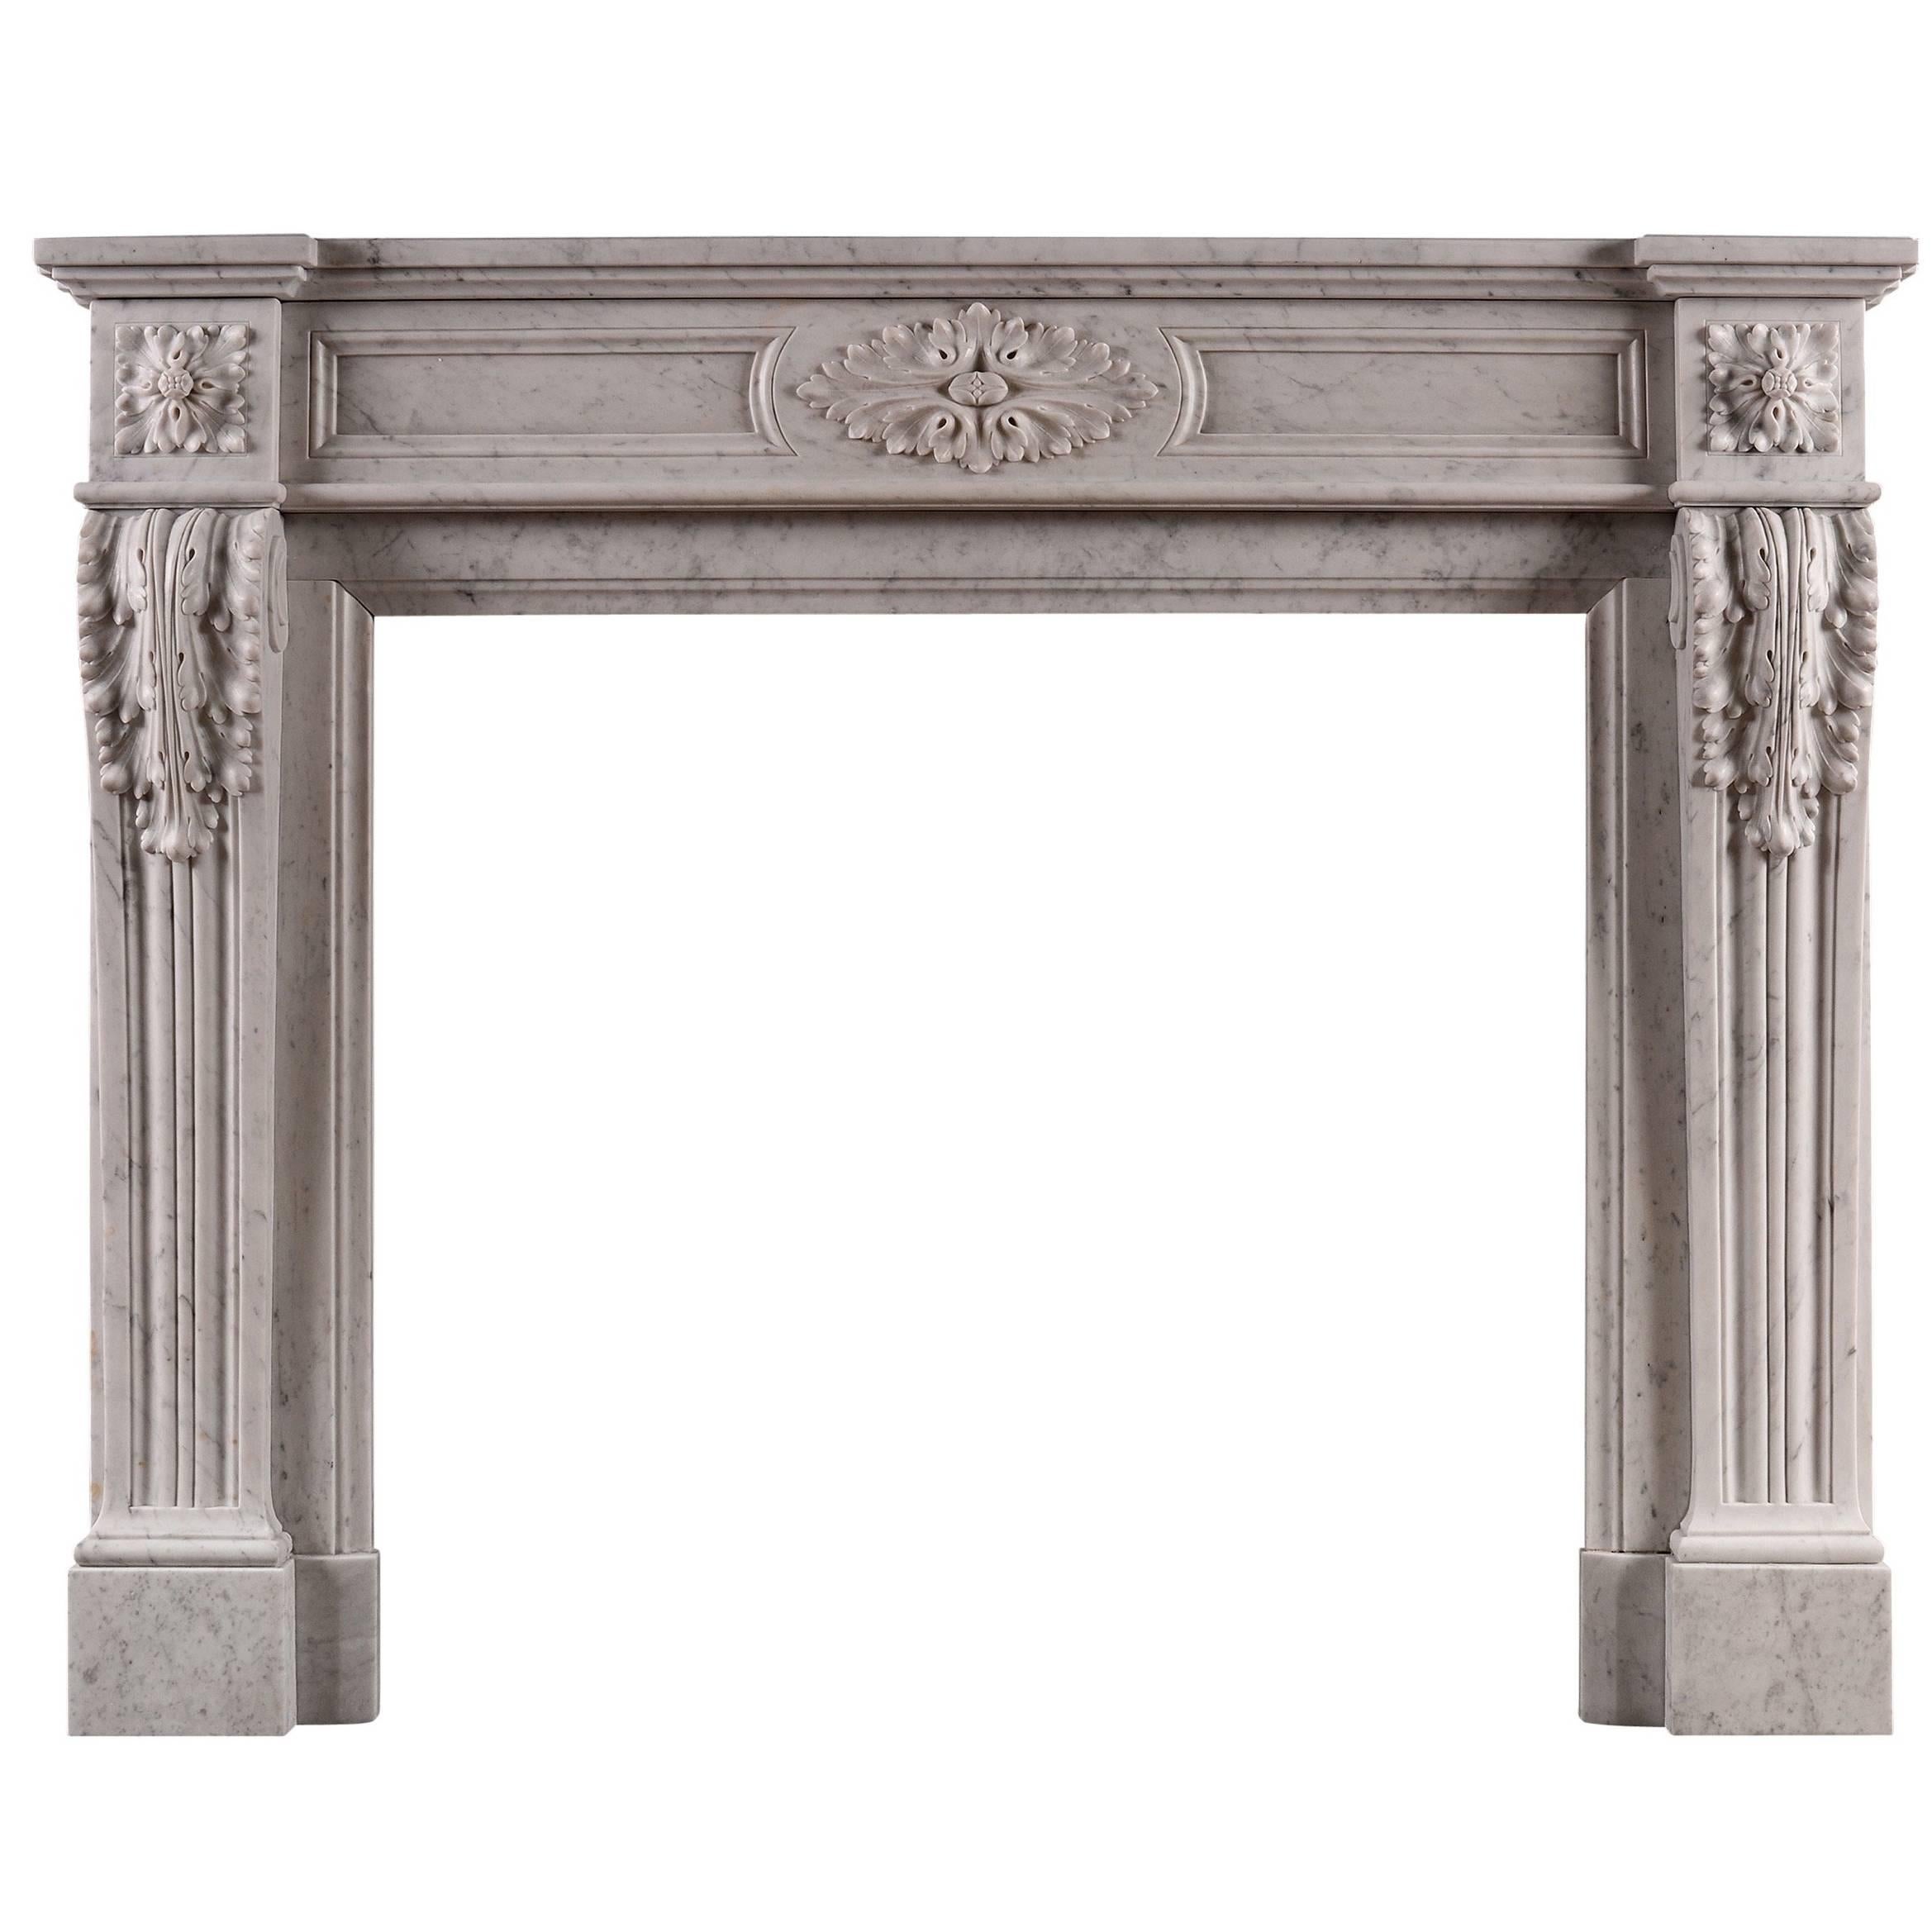 French Louis XVI Style Carrara Marble Antique Fireplace For Sale